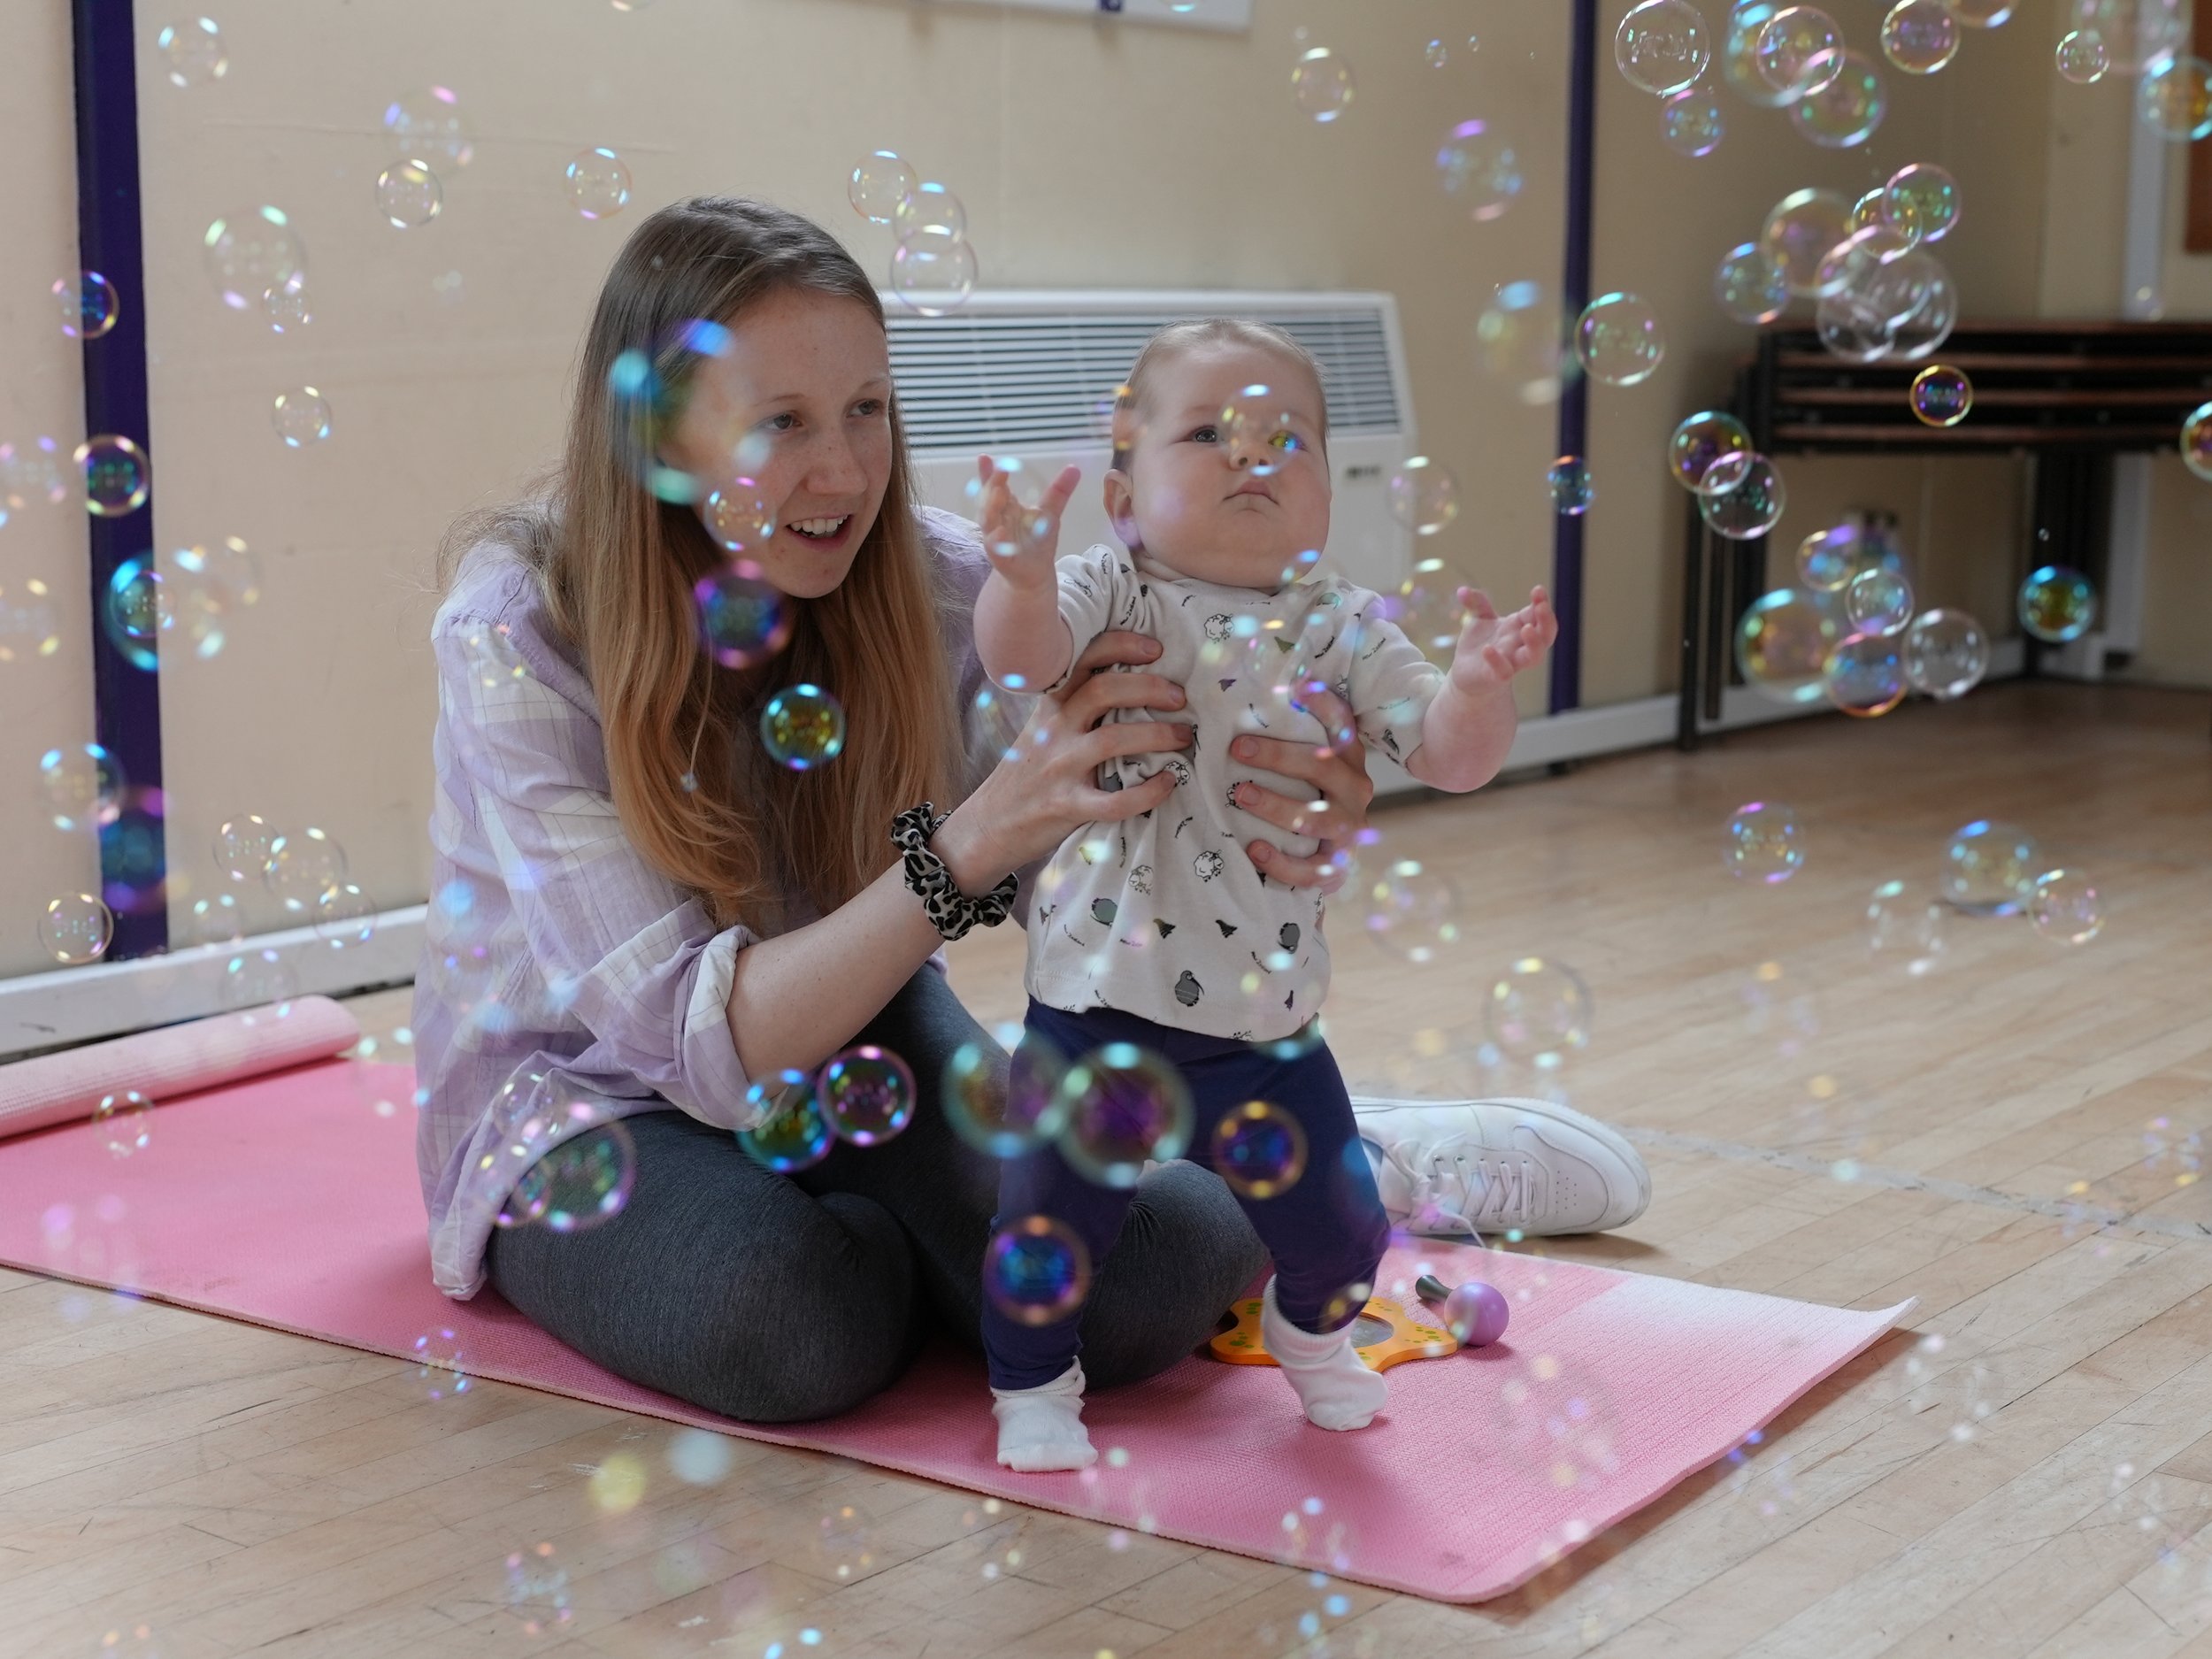  mum and baby girl are surrounded by lots of bubbles. The little girl is reaching out to pop them 